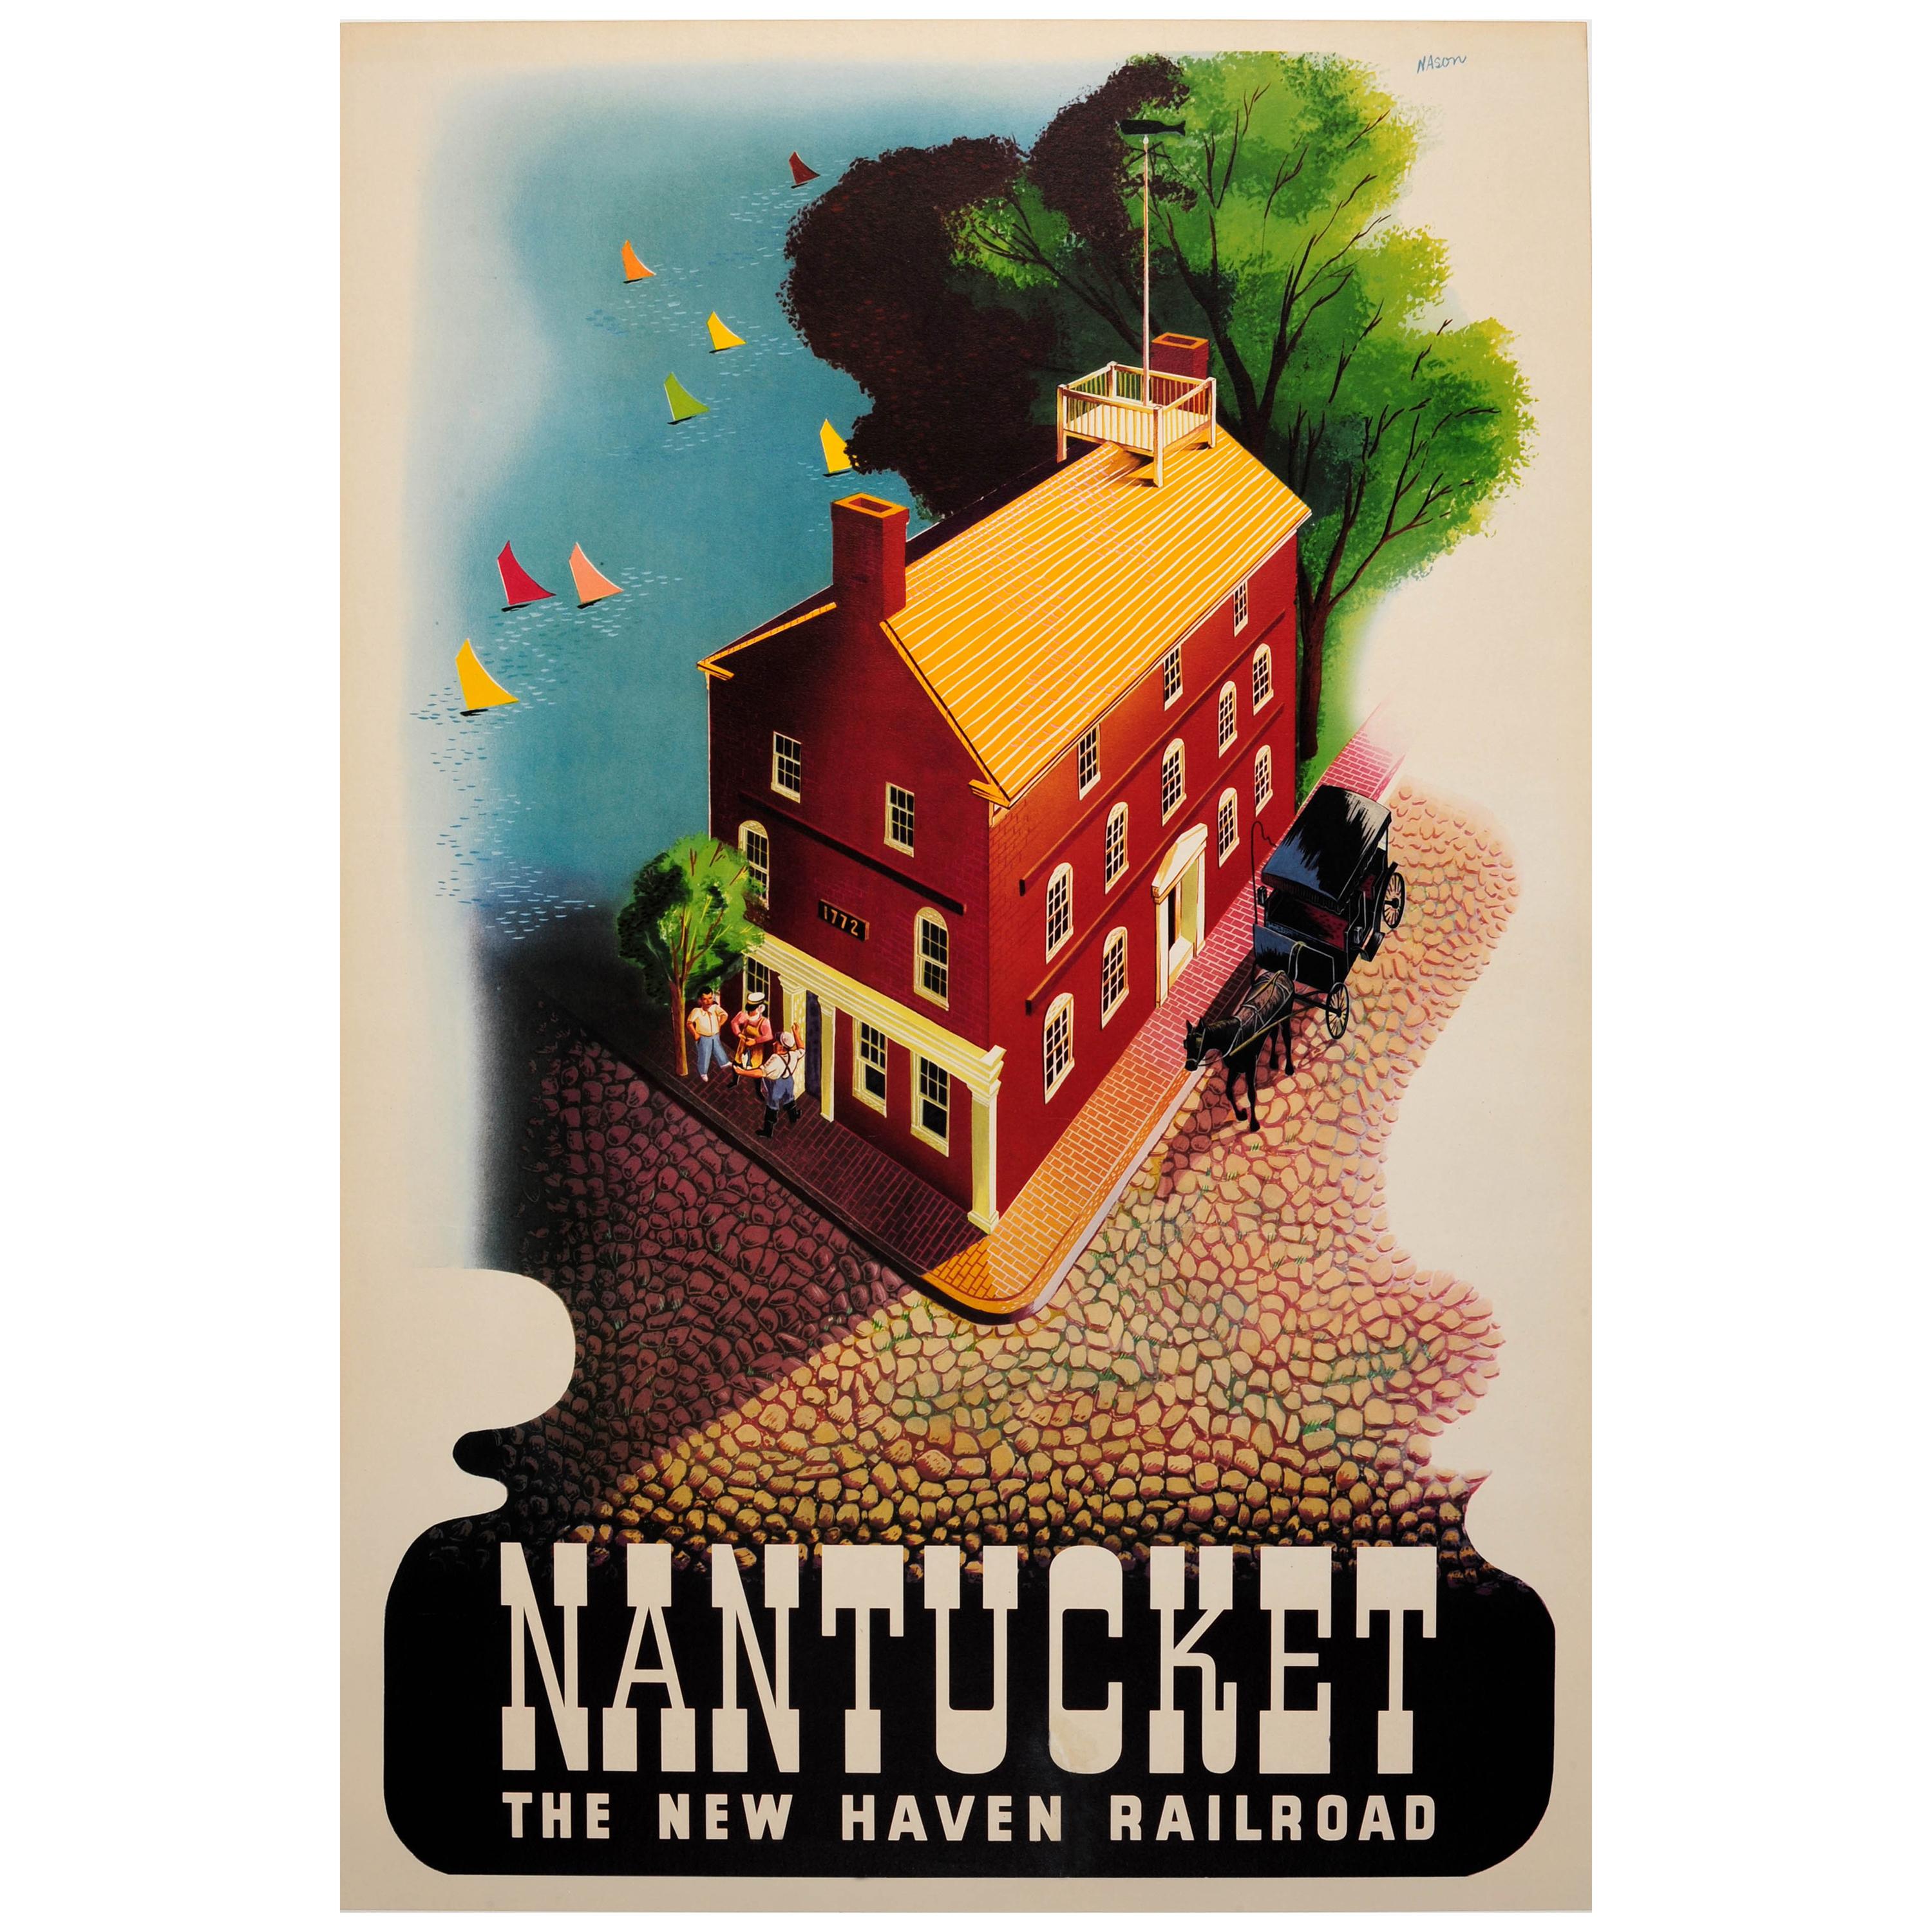 Original Vintage Poster for Nantucket The New Haven Railroad Ft. 1772 Courthouse